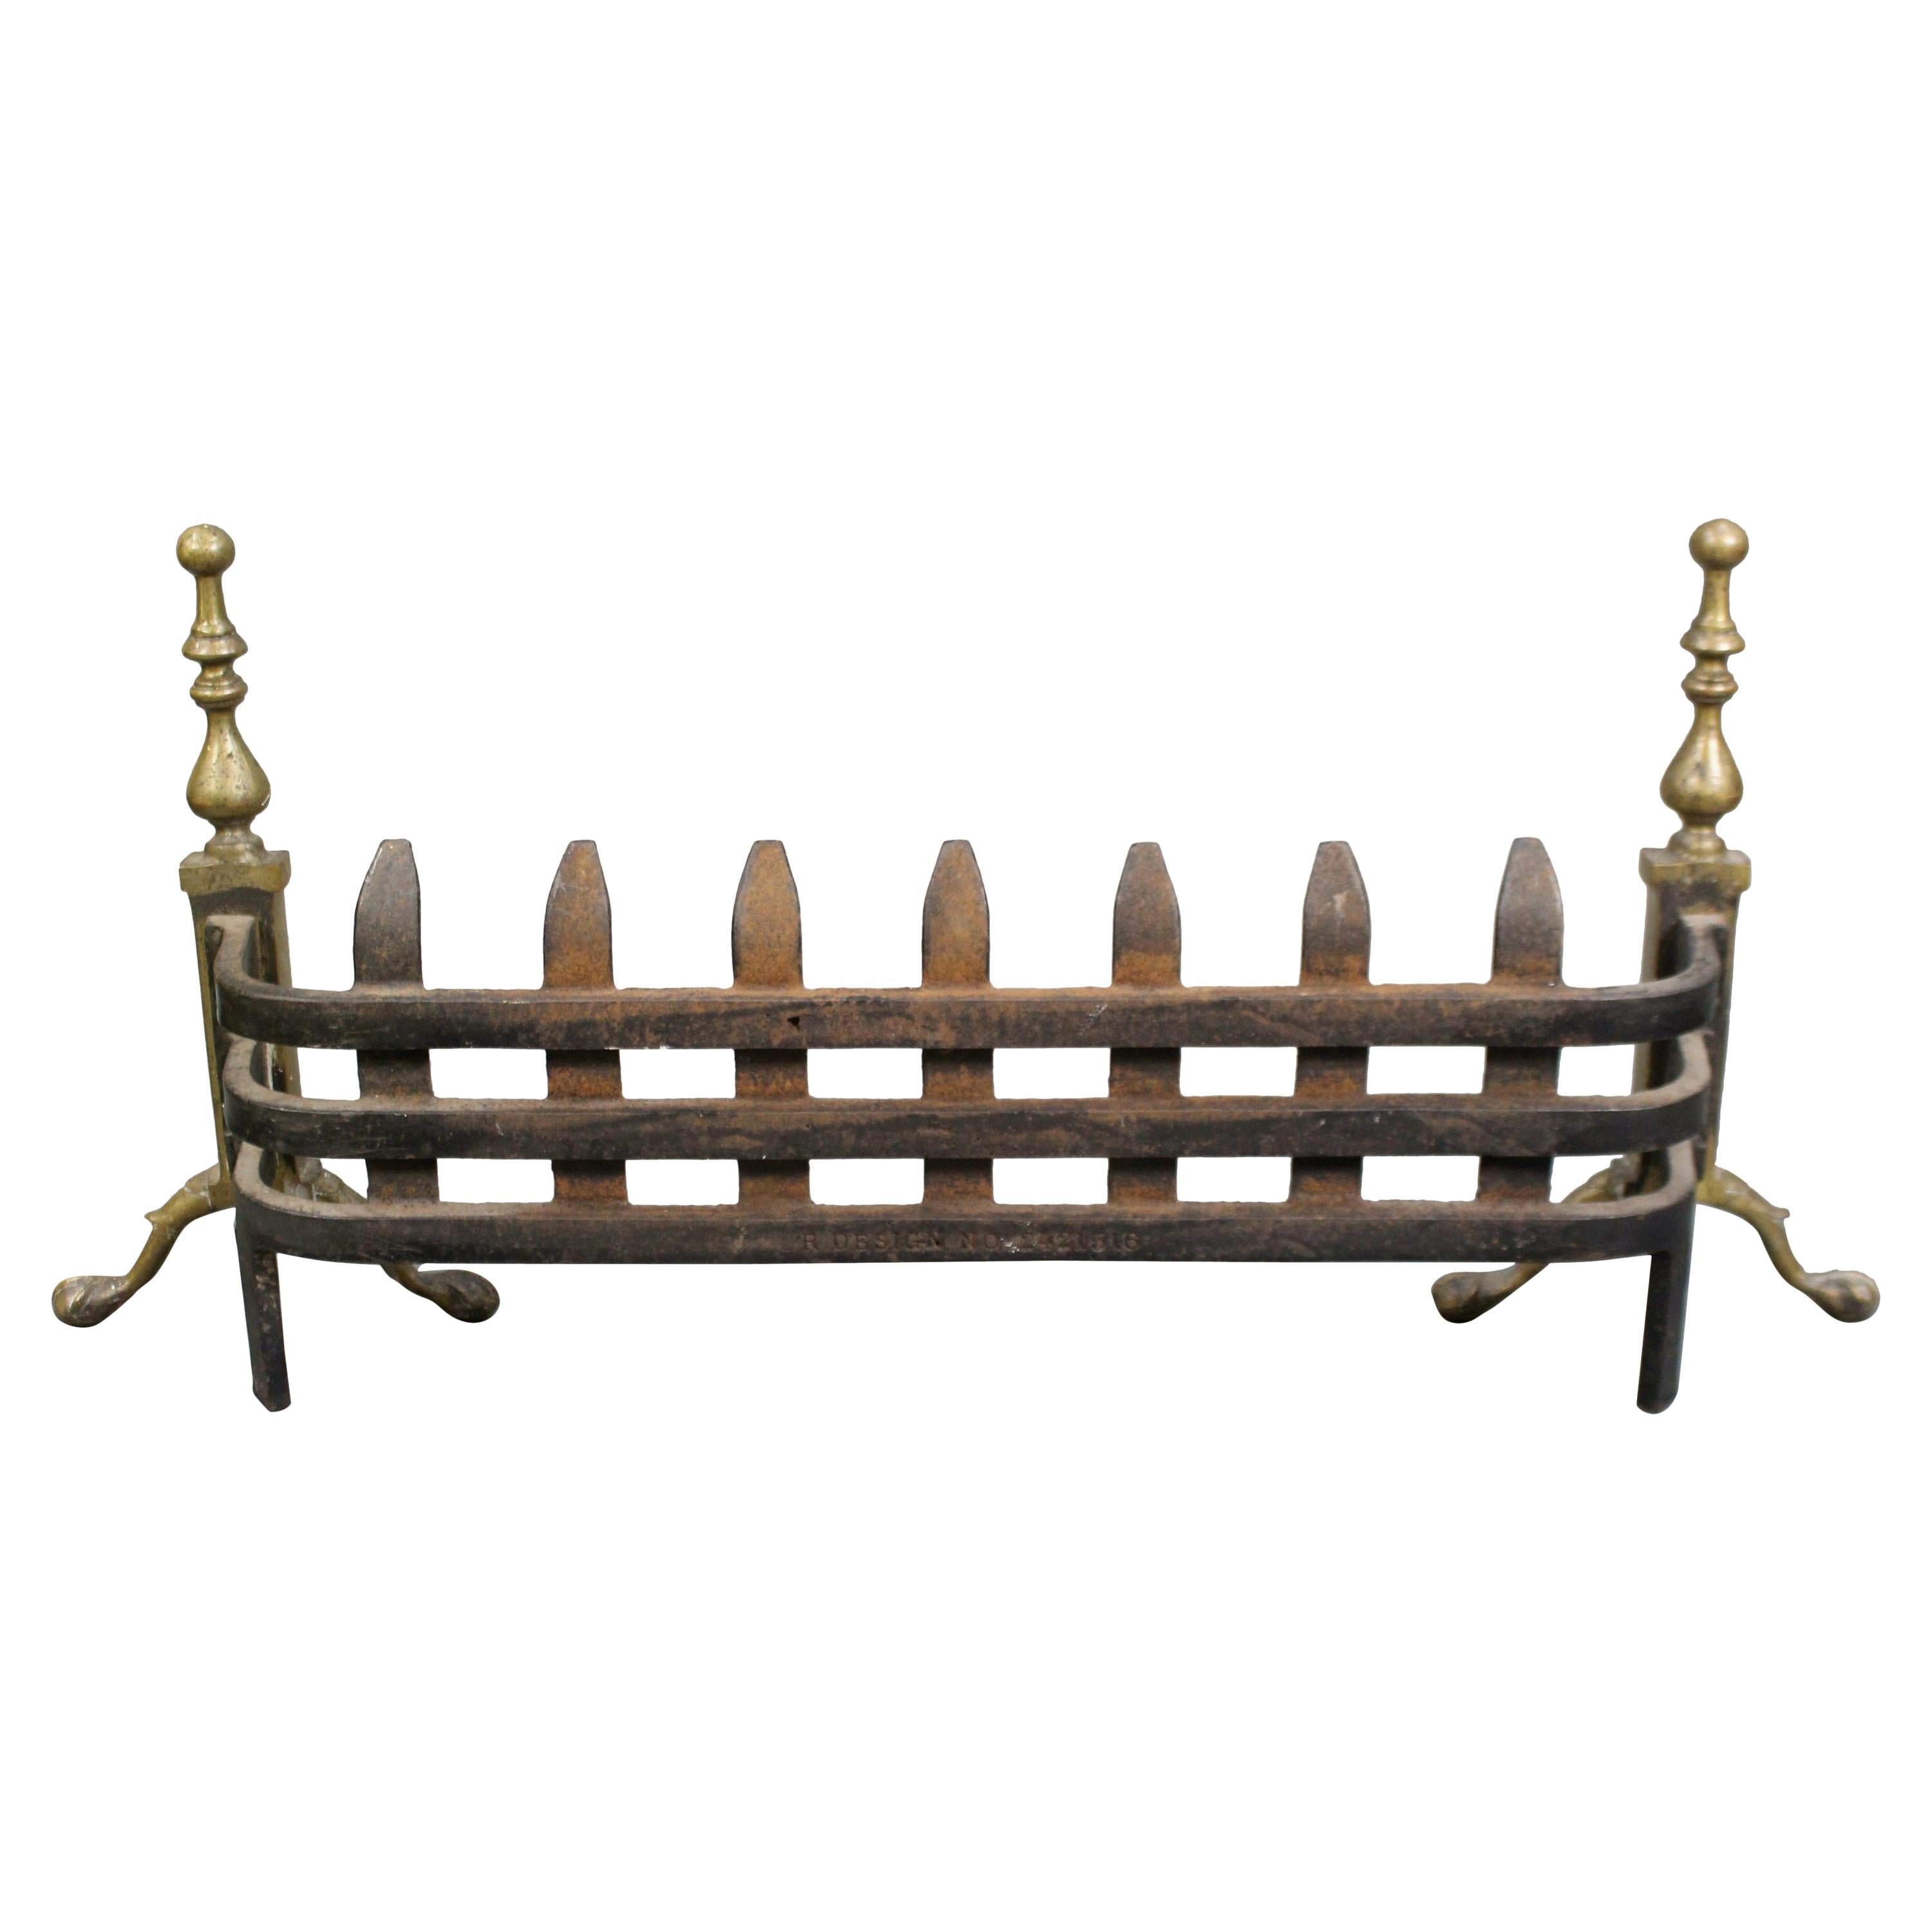 19th Century Brass and Cast Iron Fire Guard Basket Front For Sale